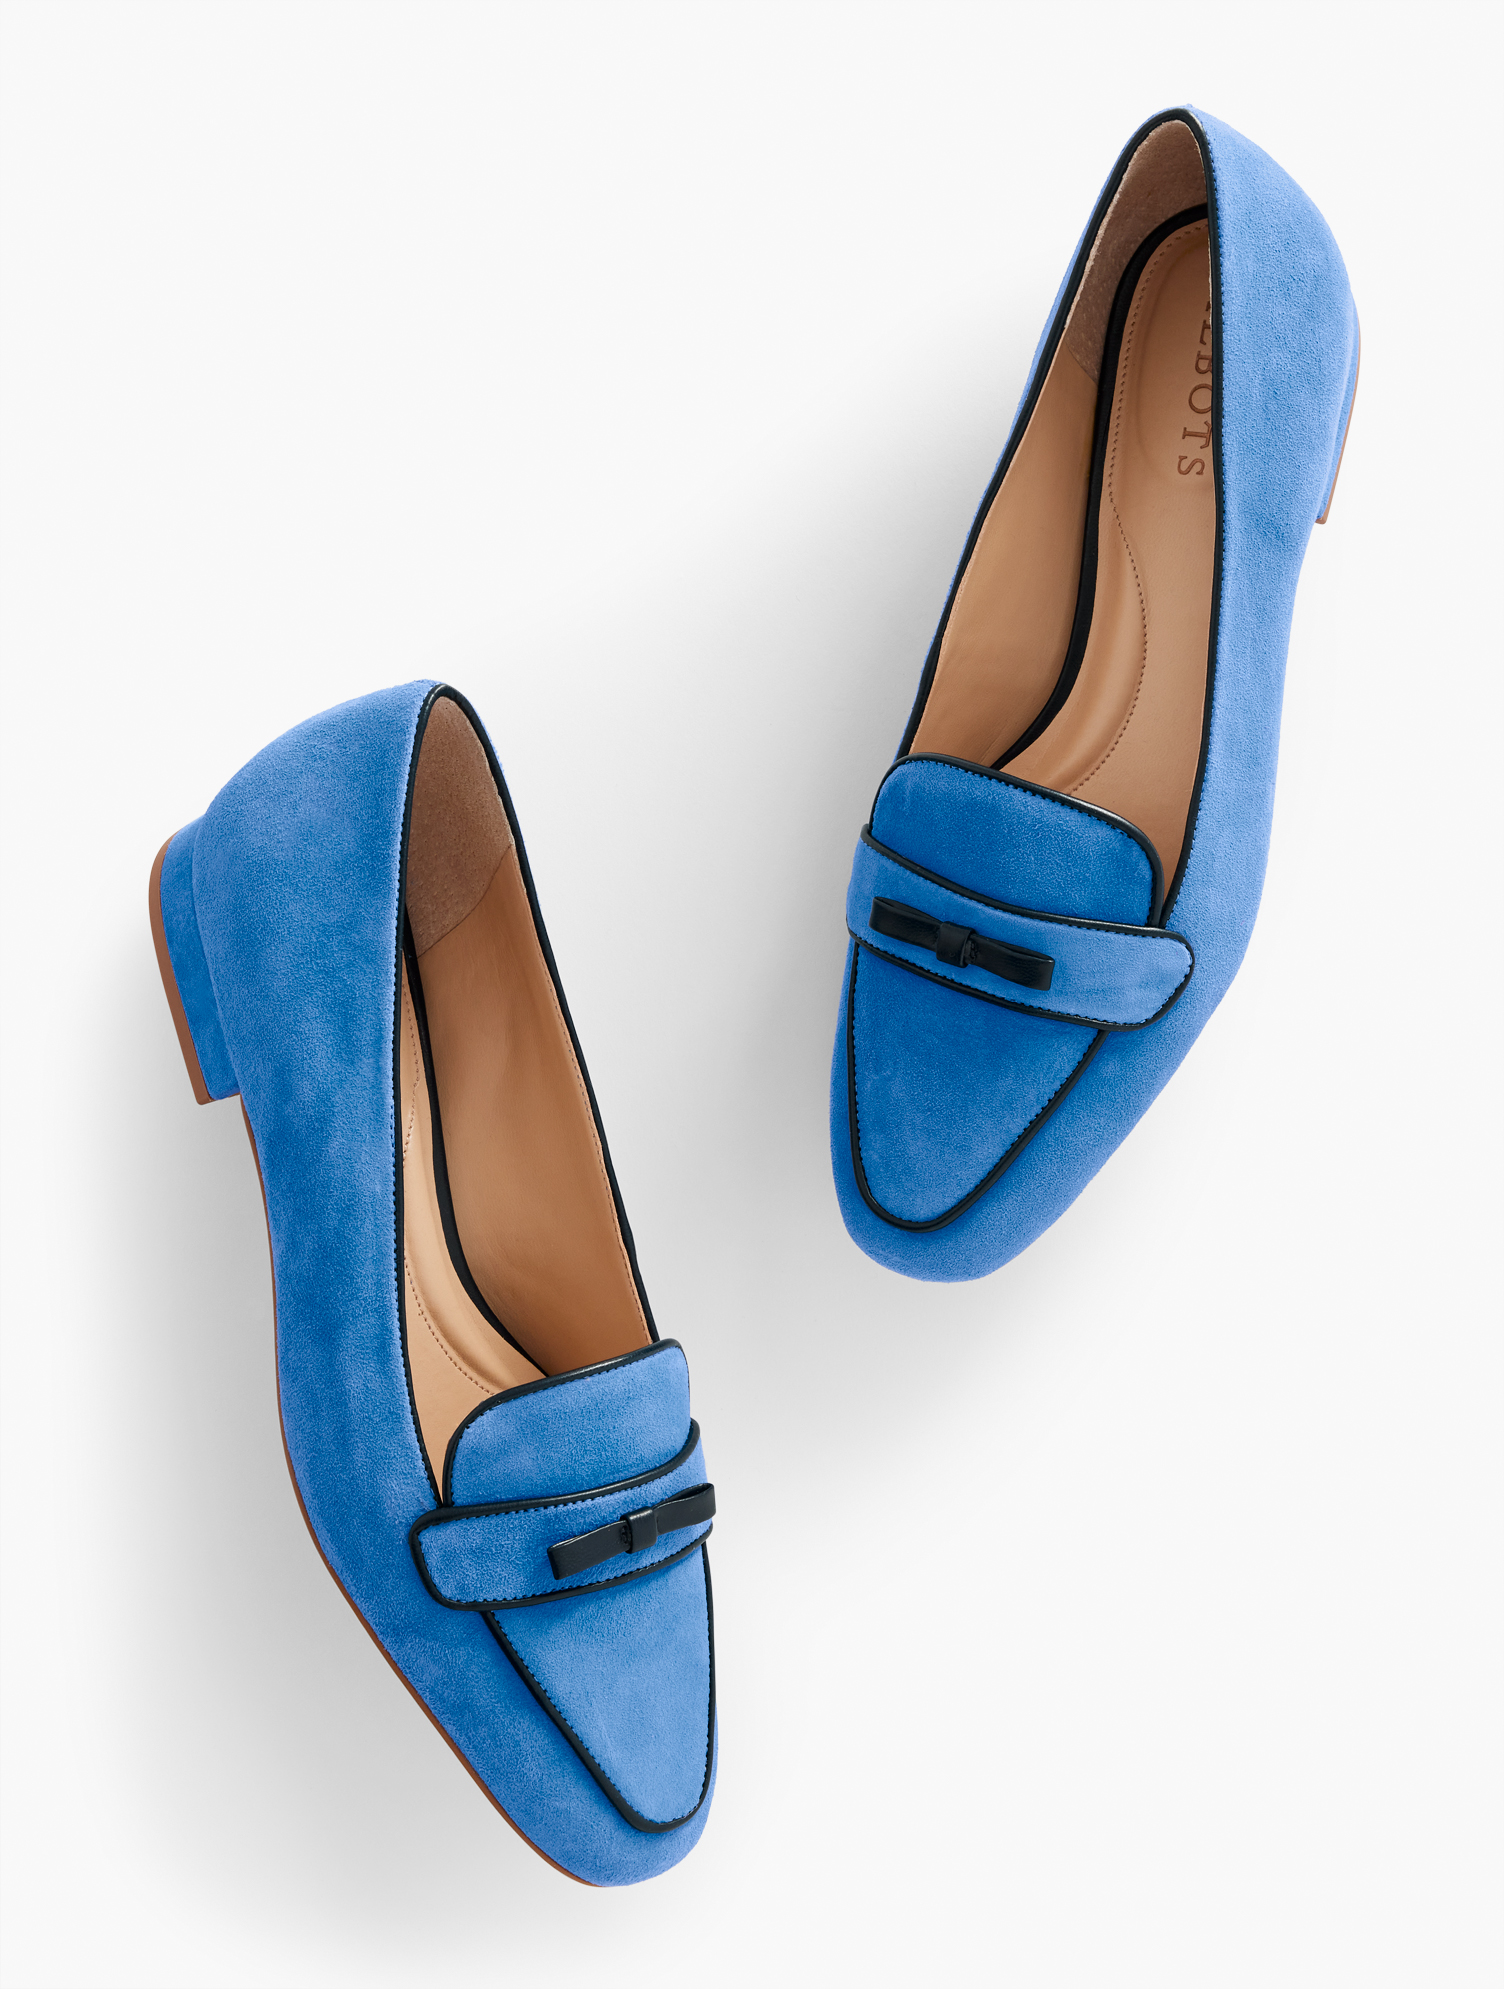 Talbots Jane Bow Loafers - Suede - Lakeshore Blue - 11m